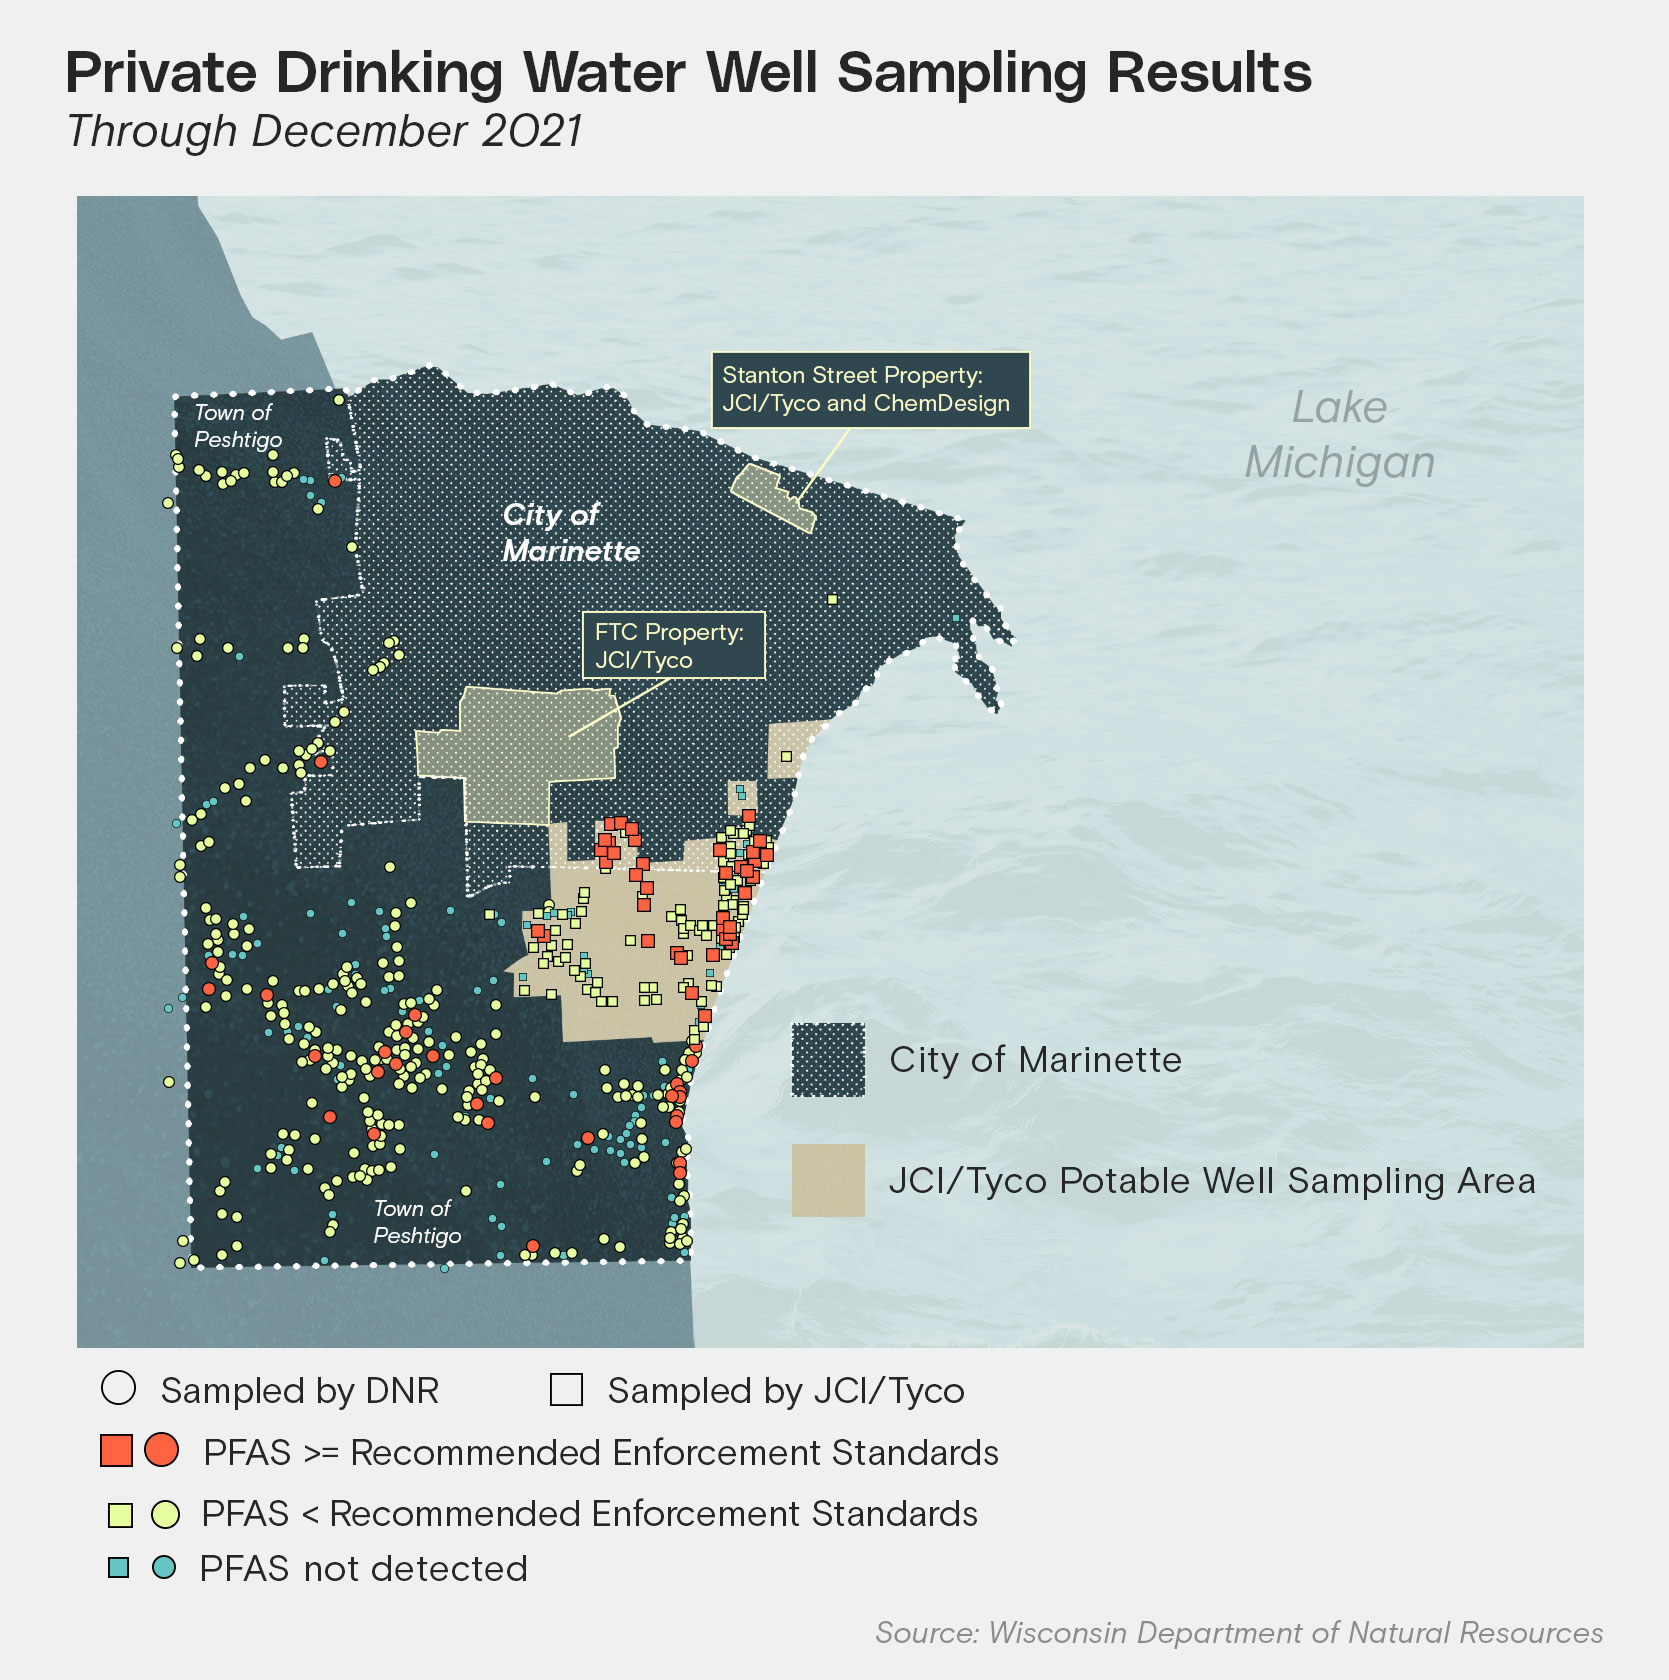 Map showing PFAs levels in private drinking water wells in the city of Marinette and town of Peshtigo in Wisconsin